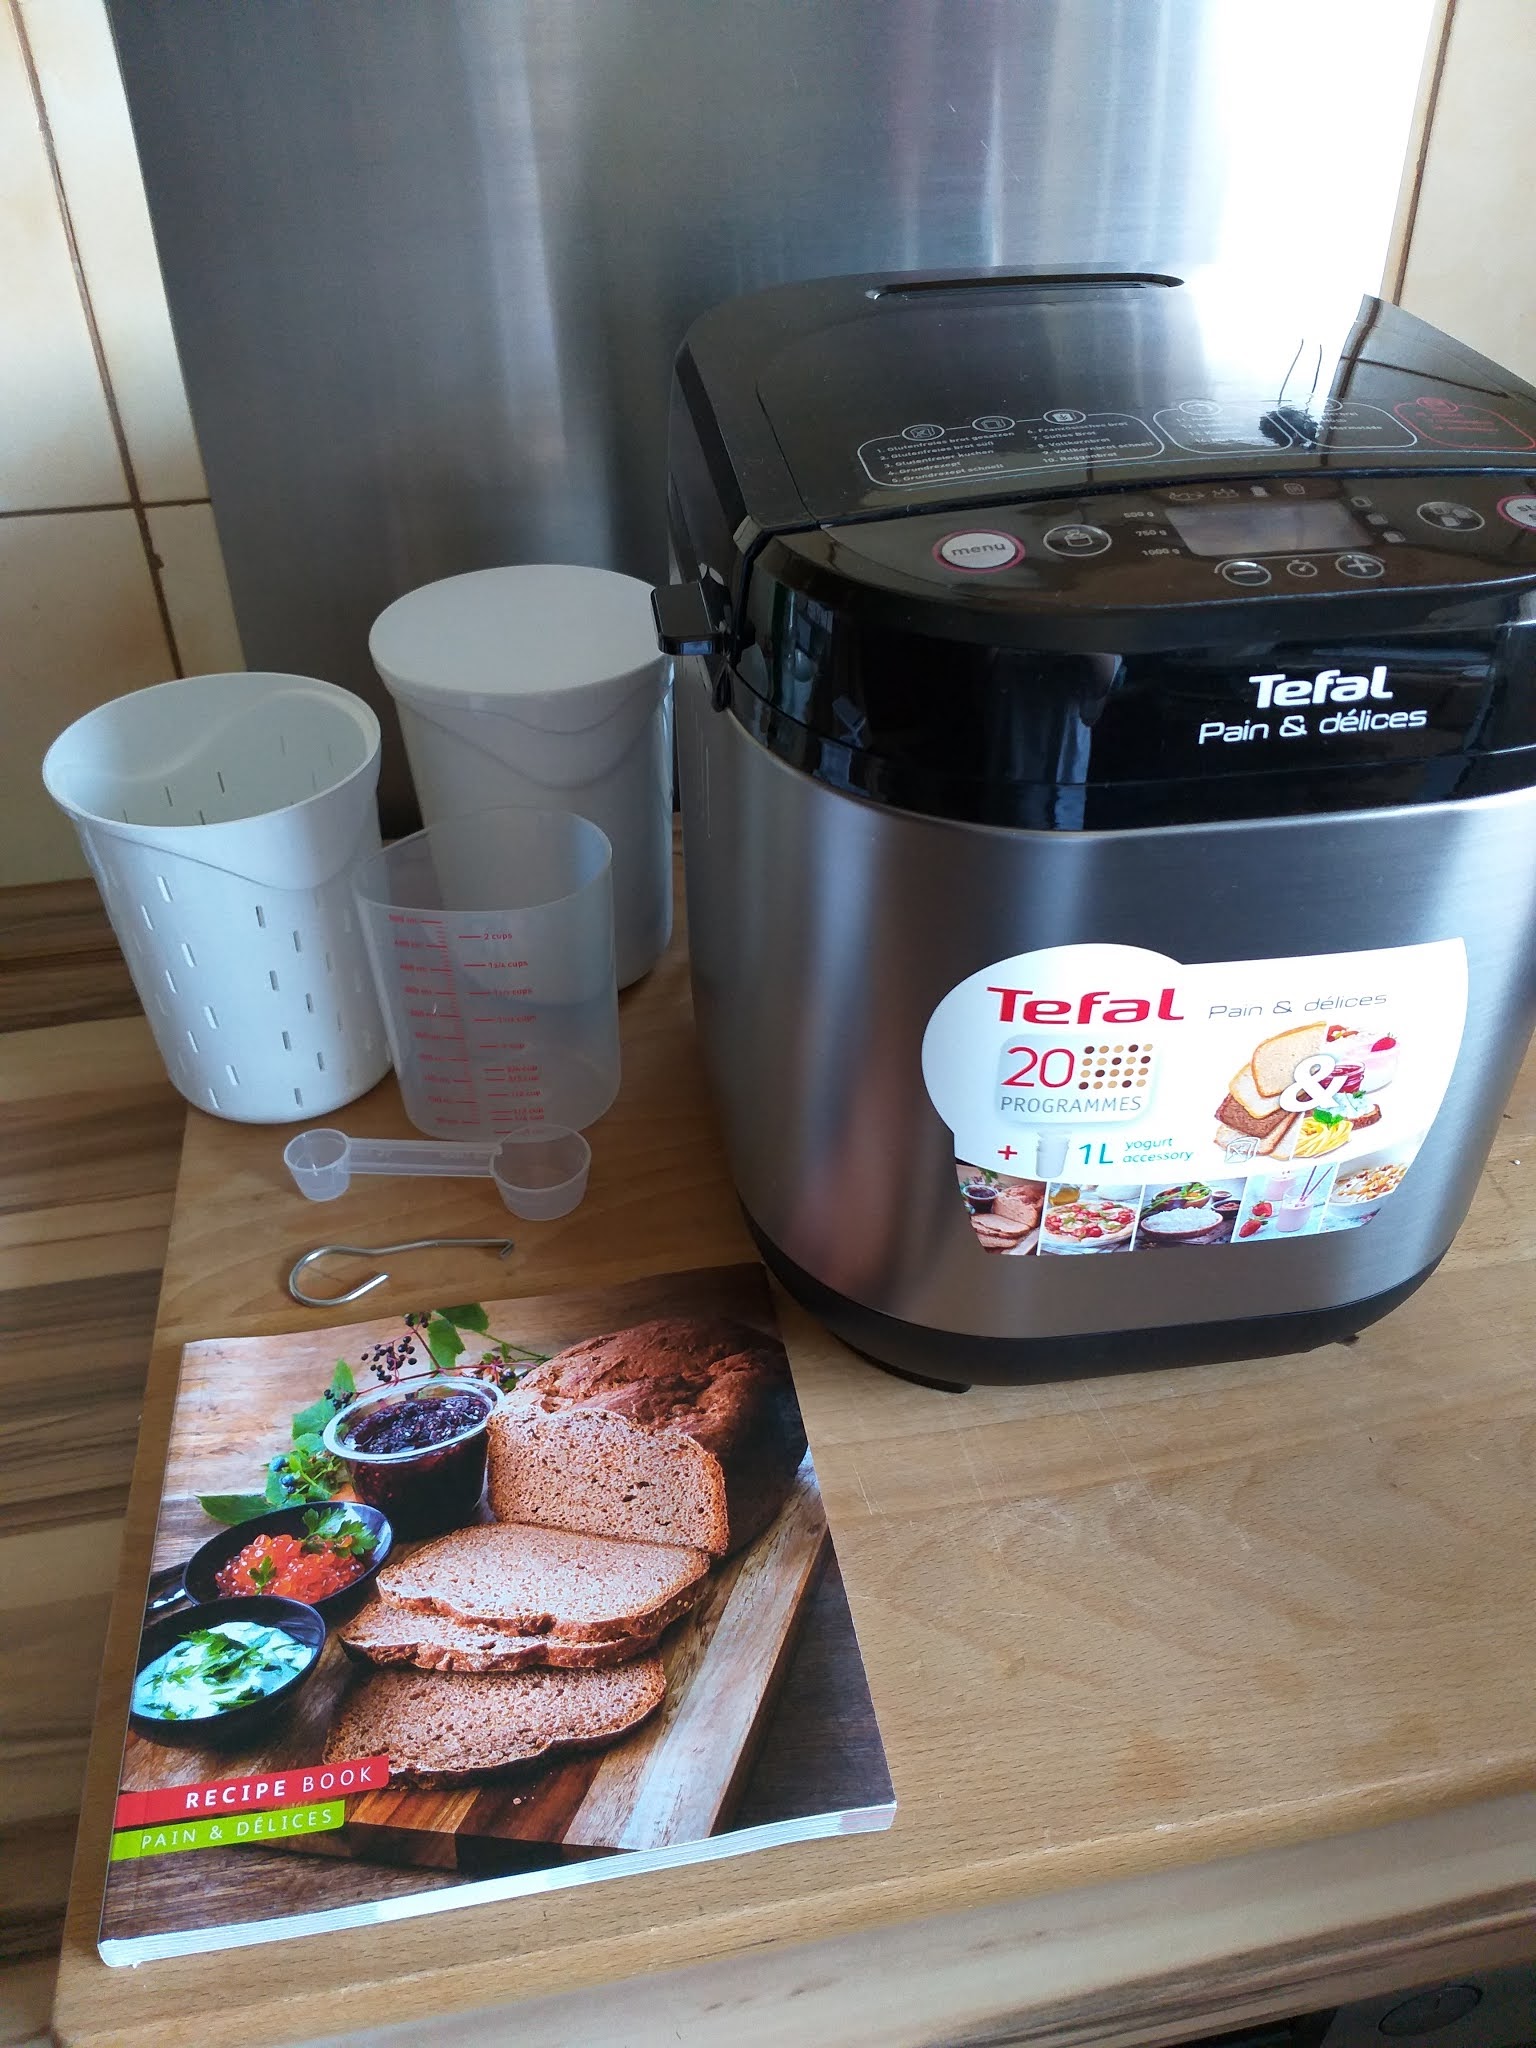 Julani - time to test: TEFAL PAIN & DELICES BROTBACKAUTOMAT